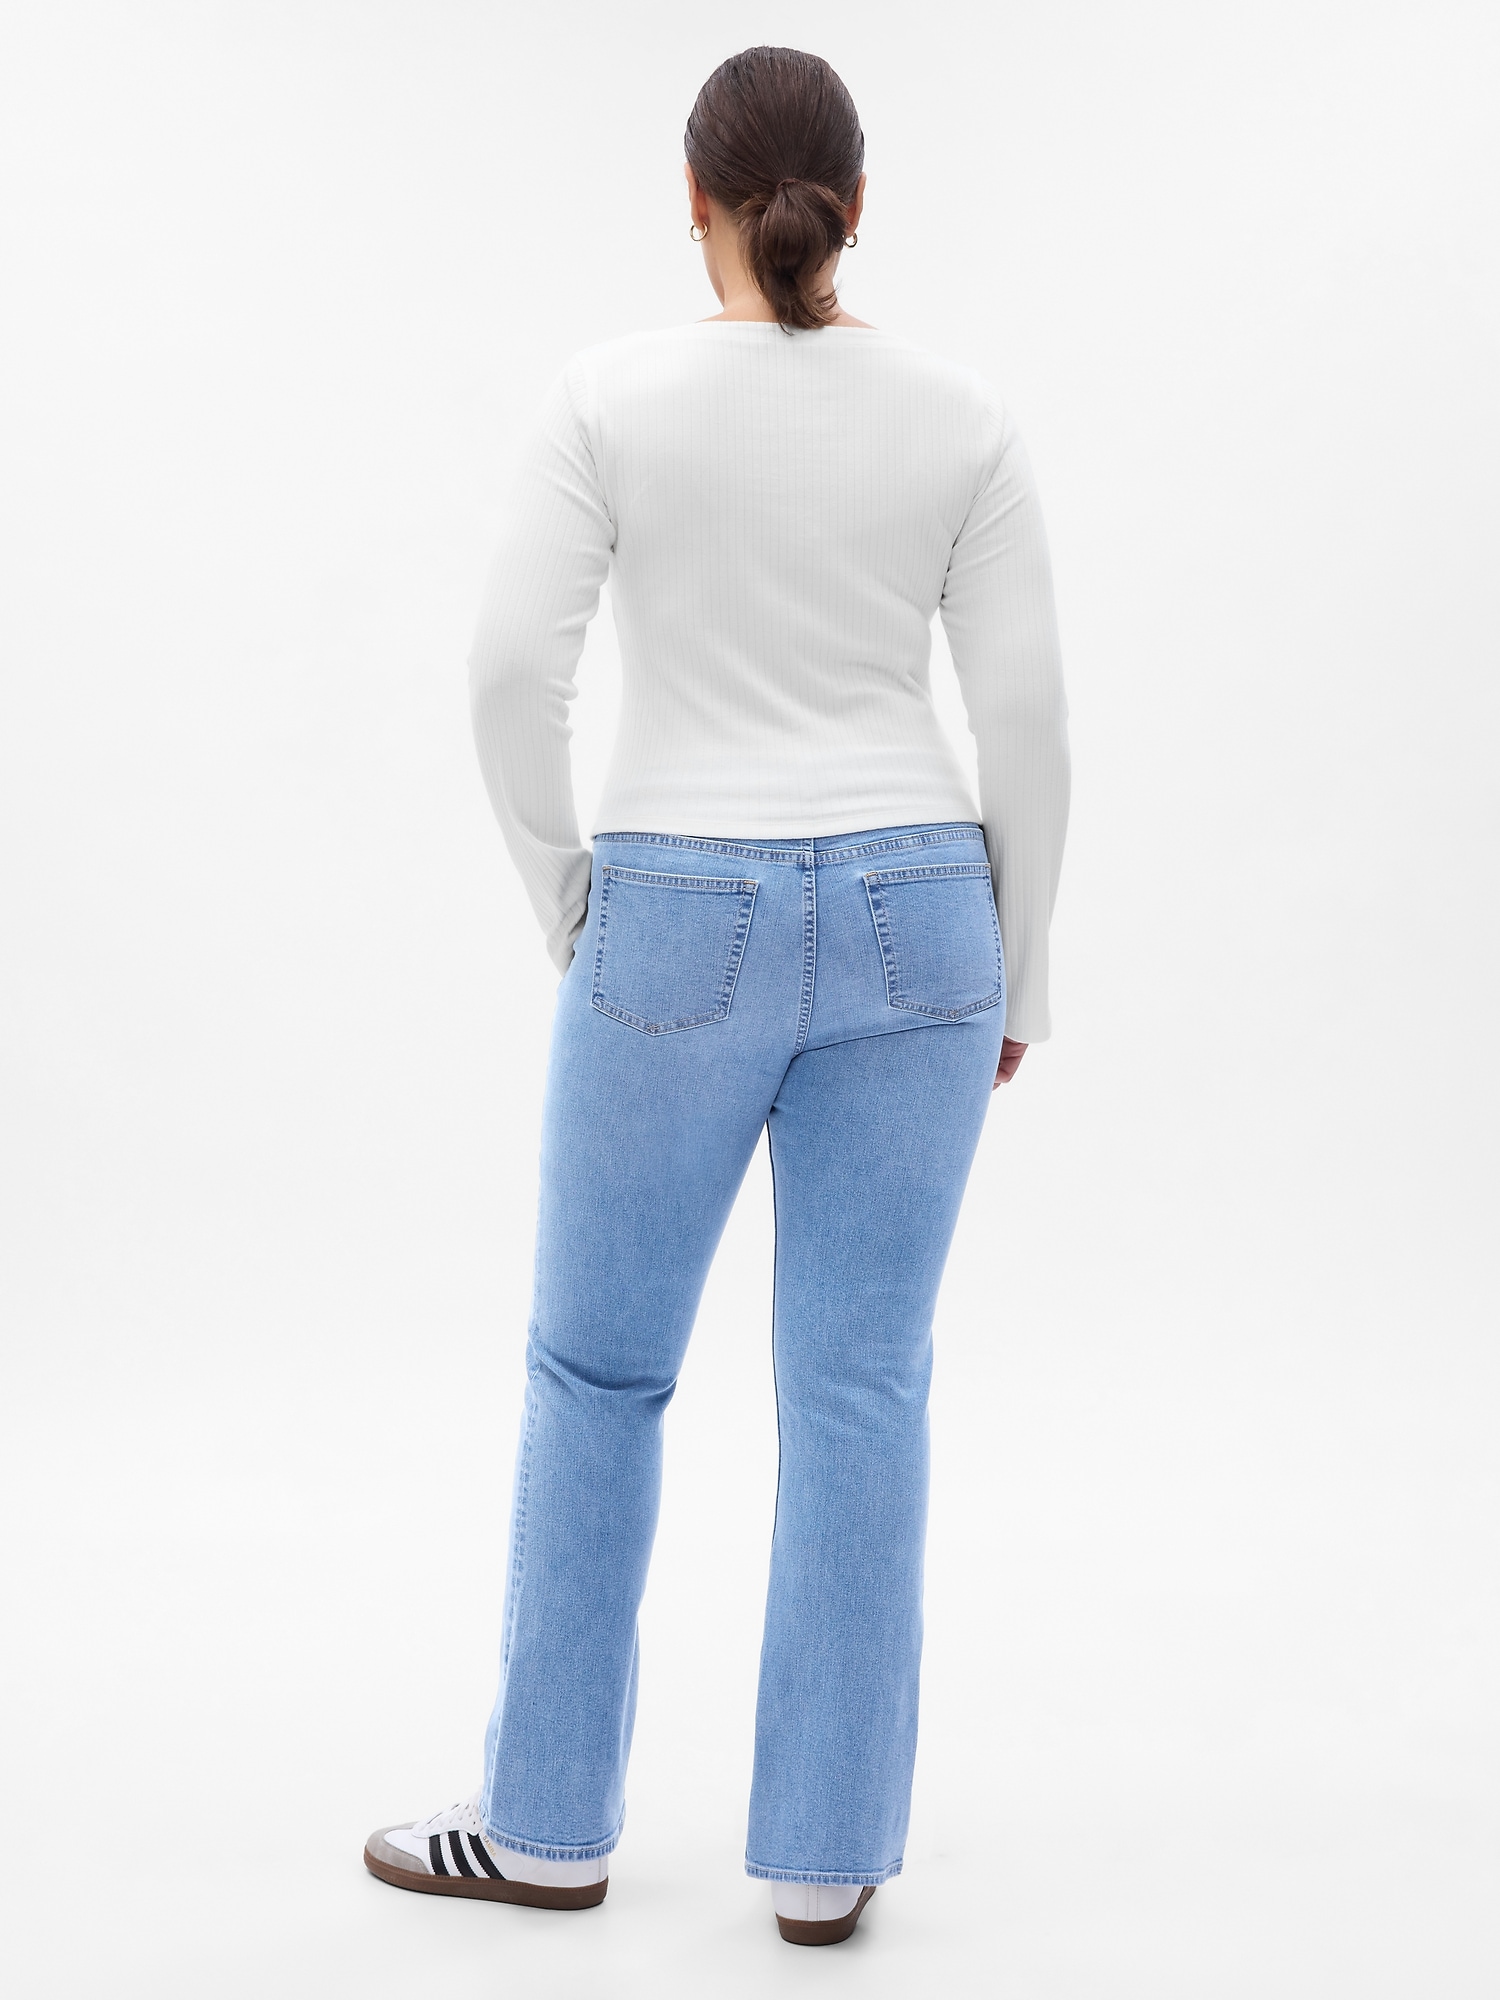 Low Rise Baby Boot Jeans | Gap